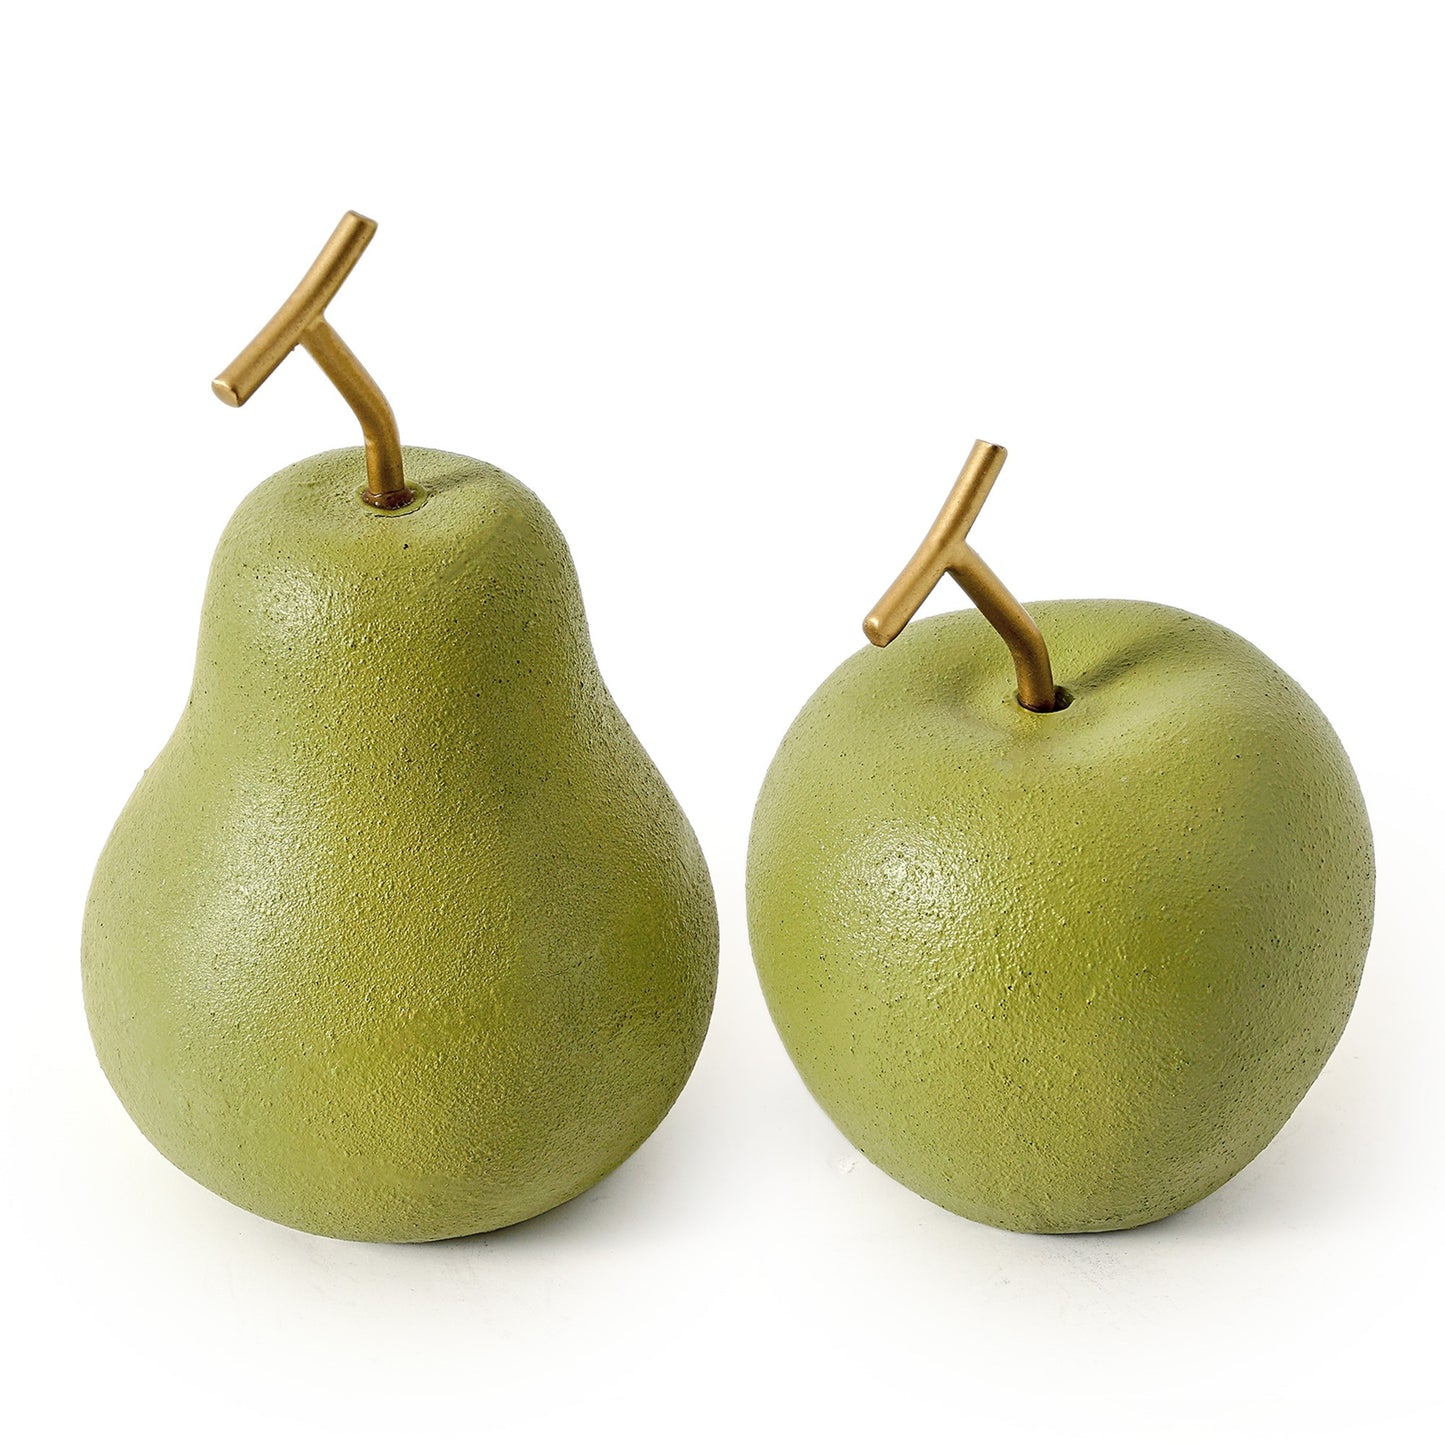 Resin Apple And Pear Fruit Tabletop Decor, Set Of 2